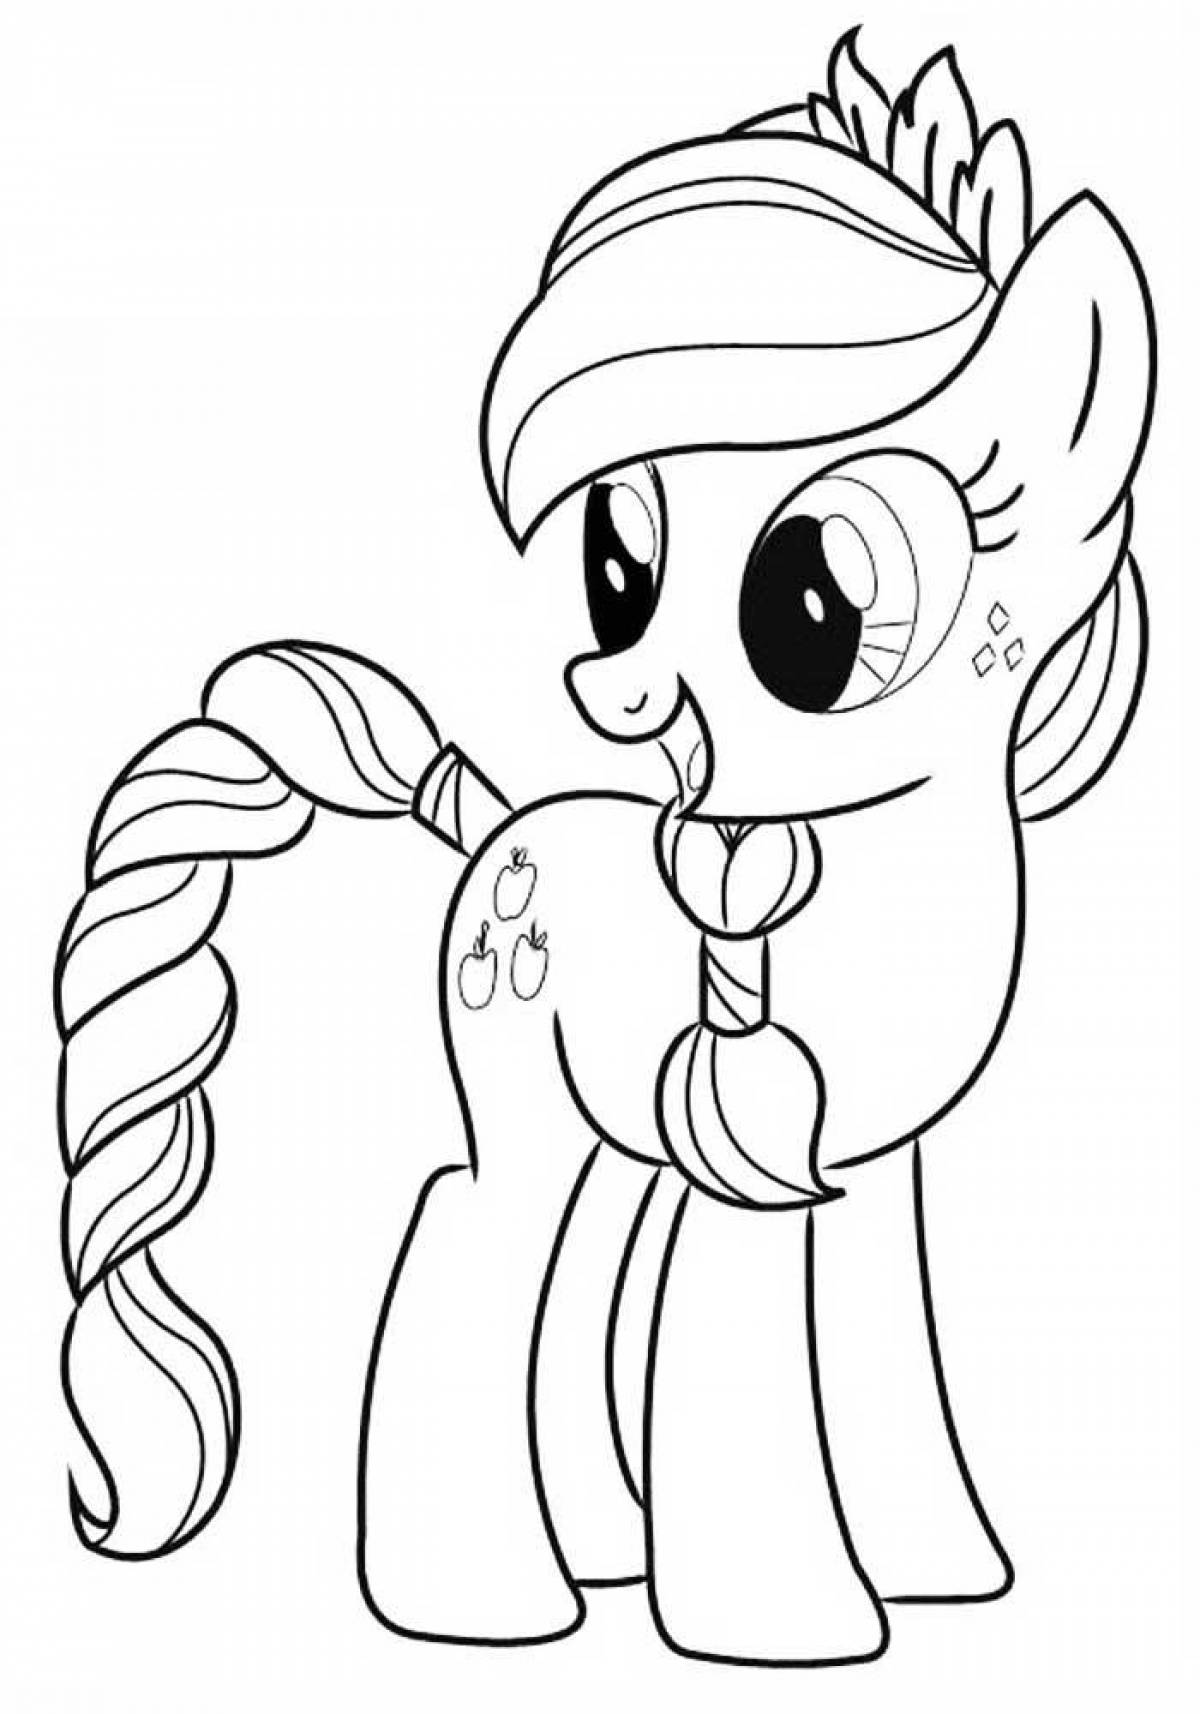 Exquisite pony coloring for girls